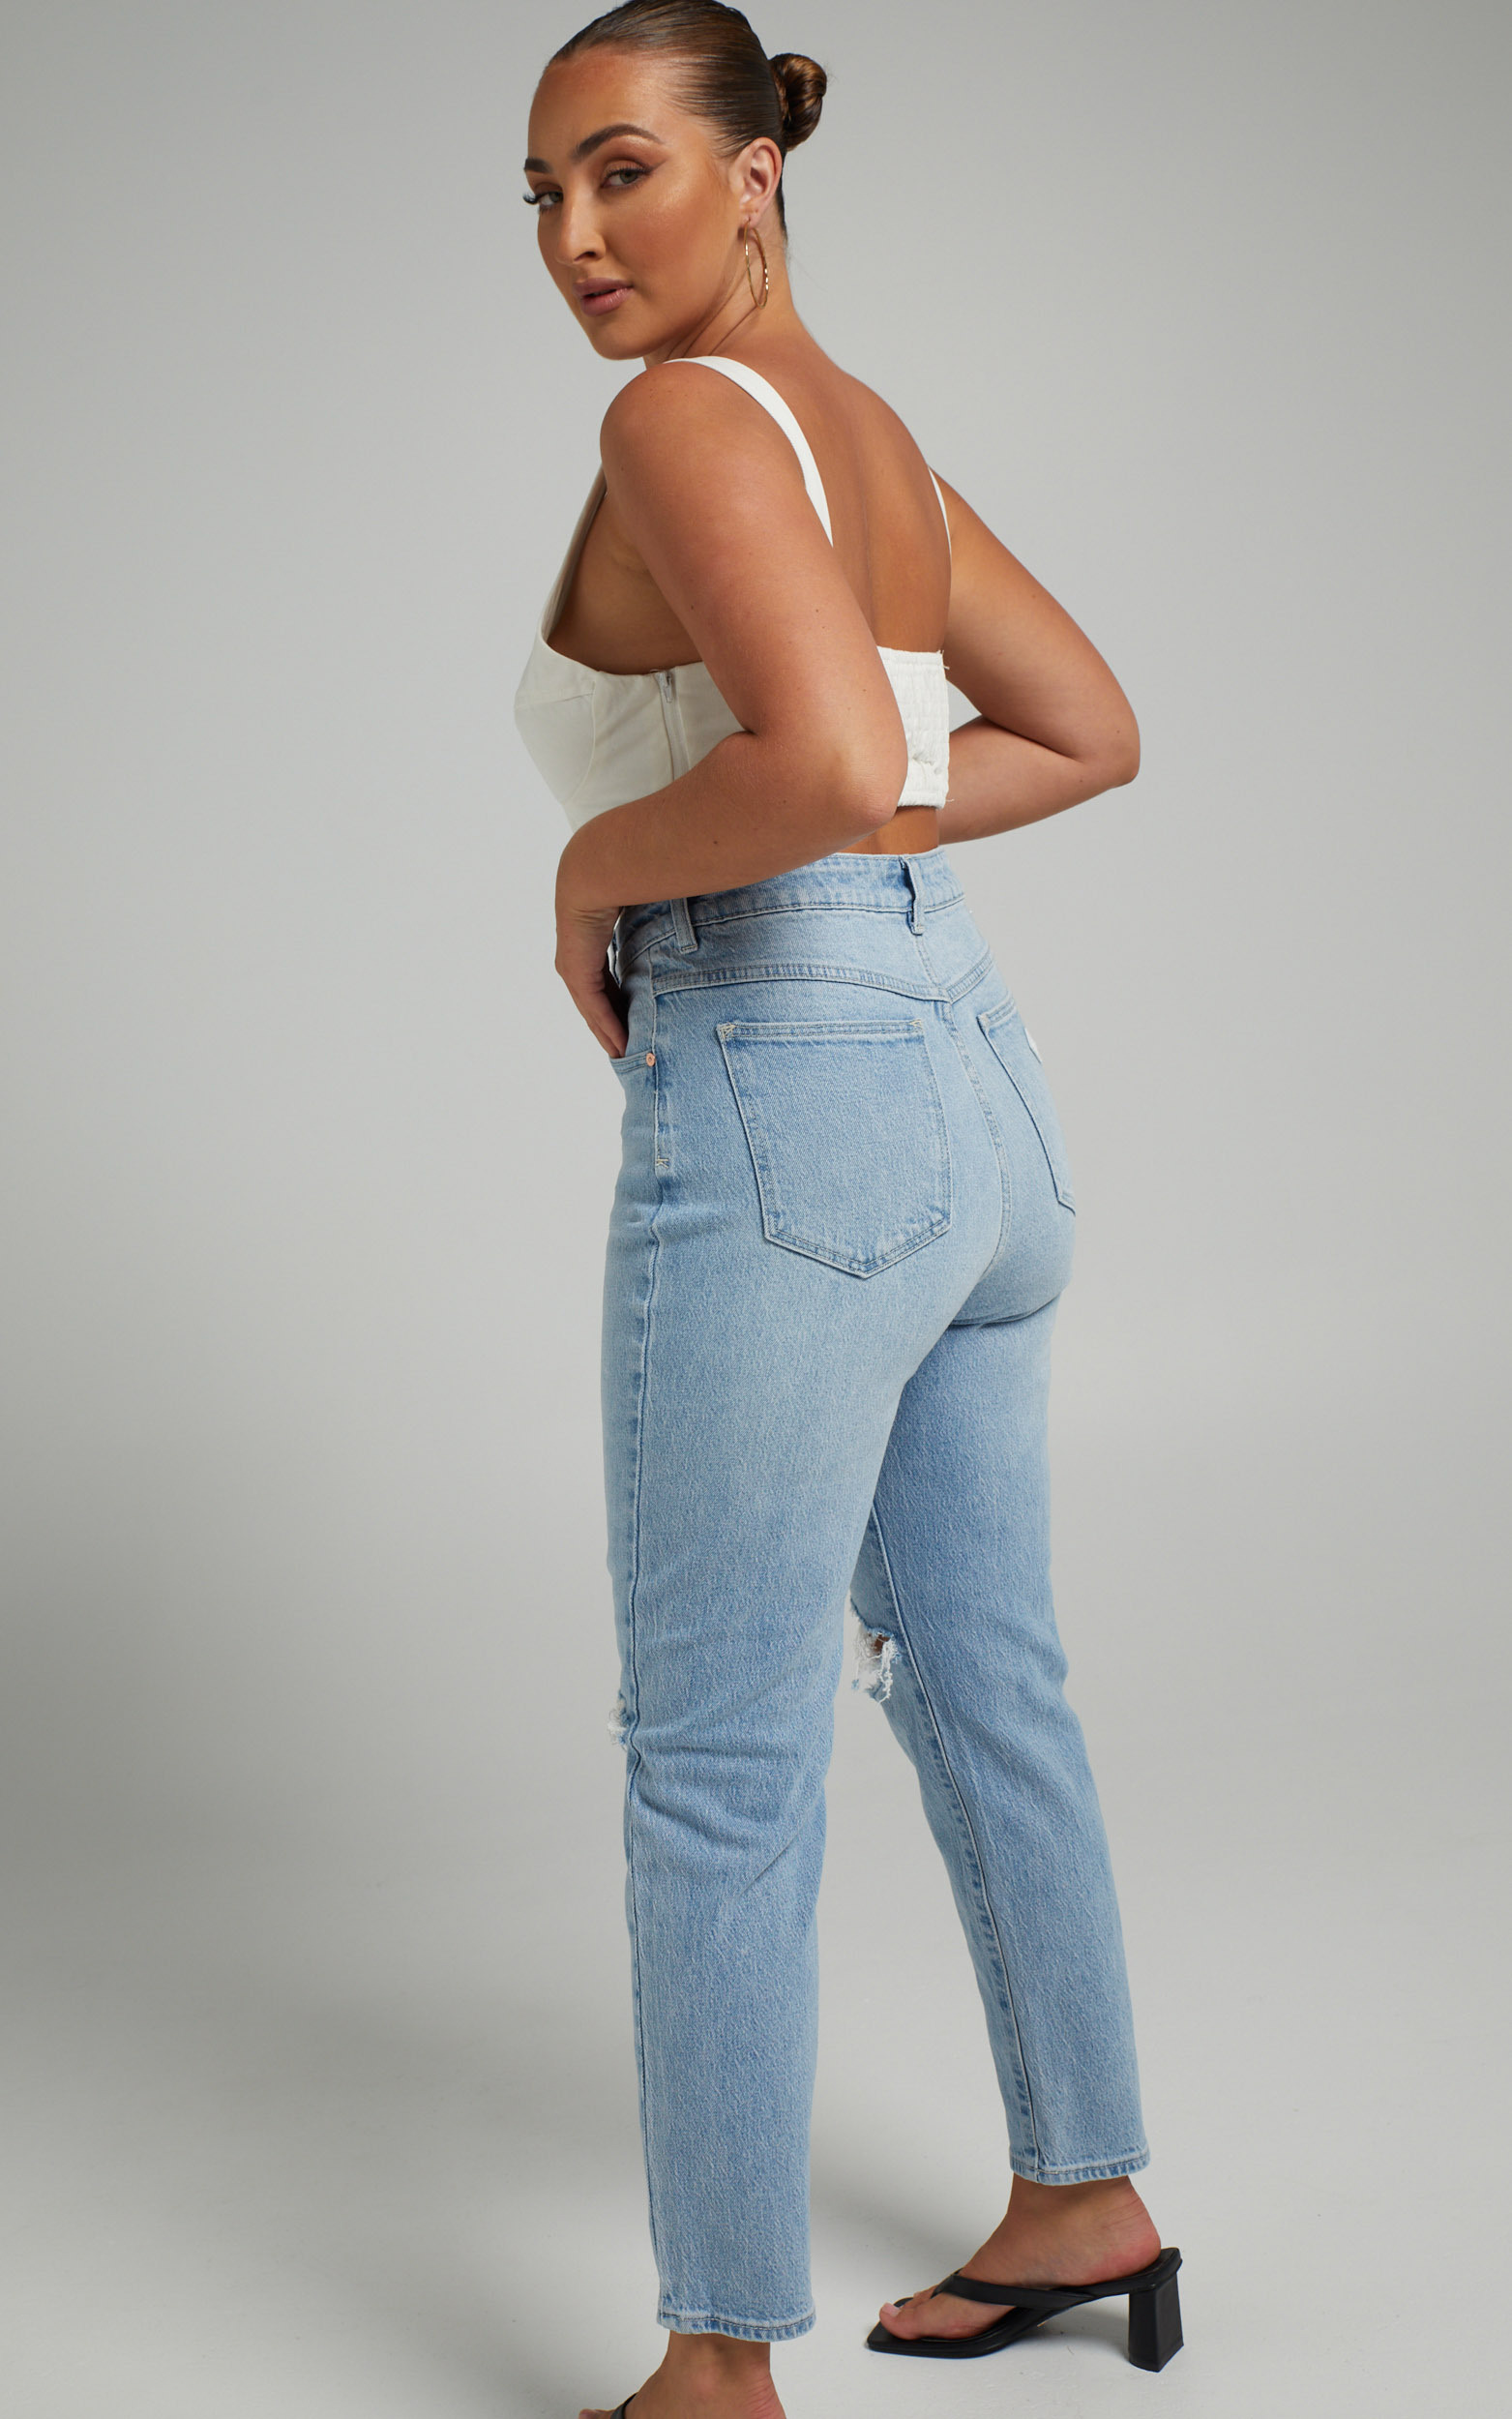 Abrand - A `94 High Slim Jeans in Gina Rip - 06, BLU1, hi-res image number null